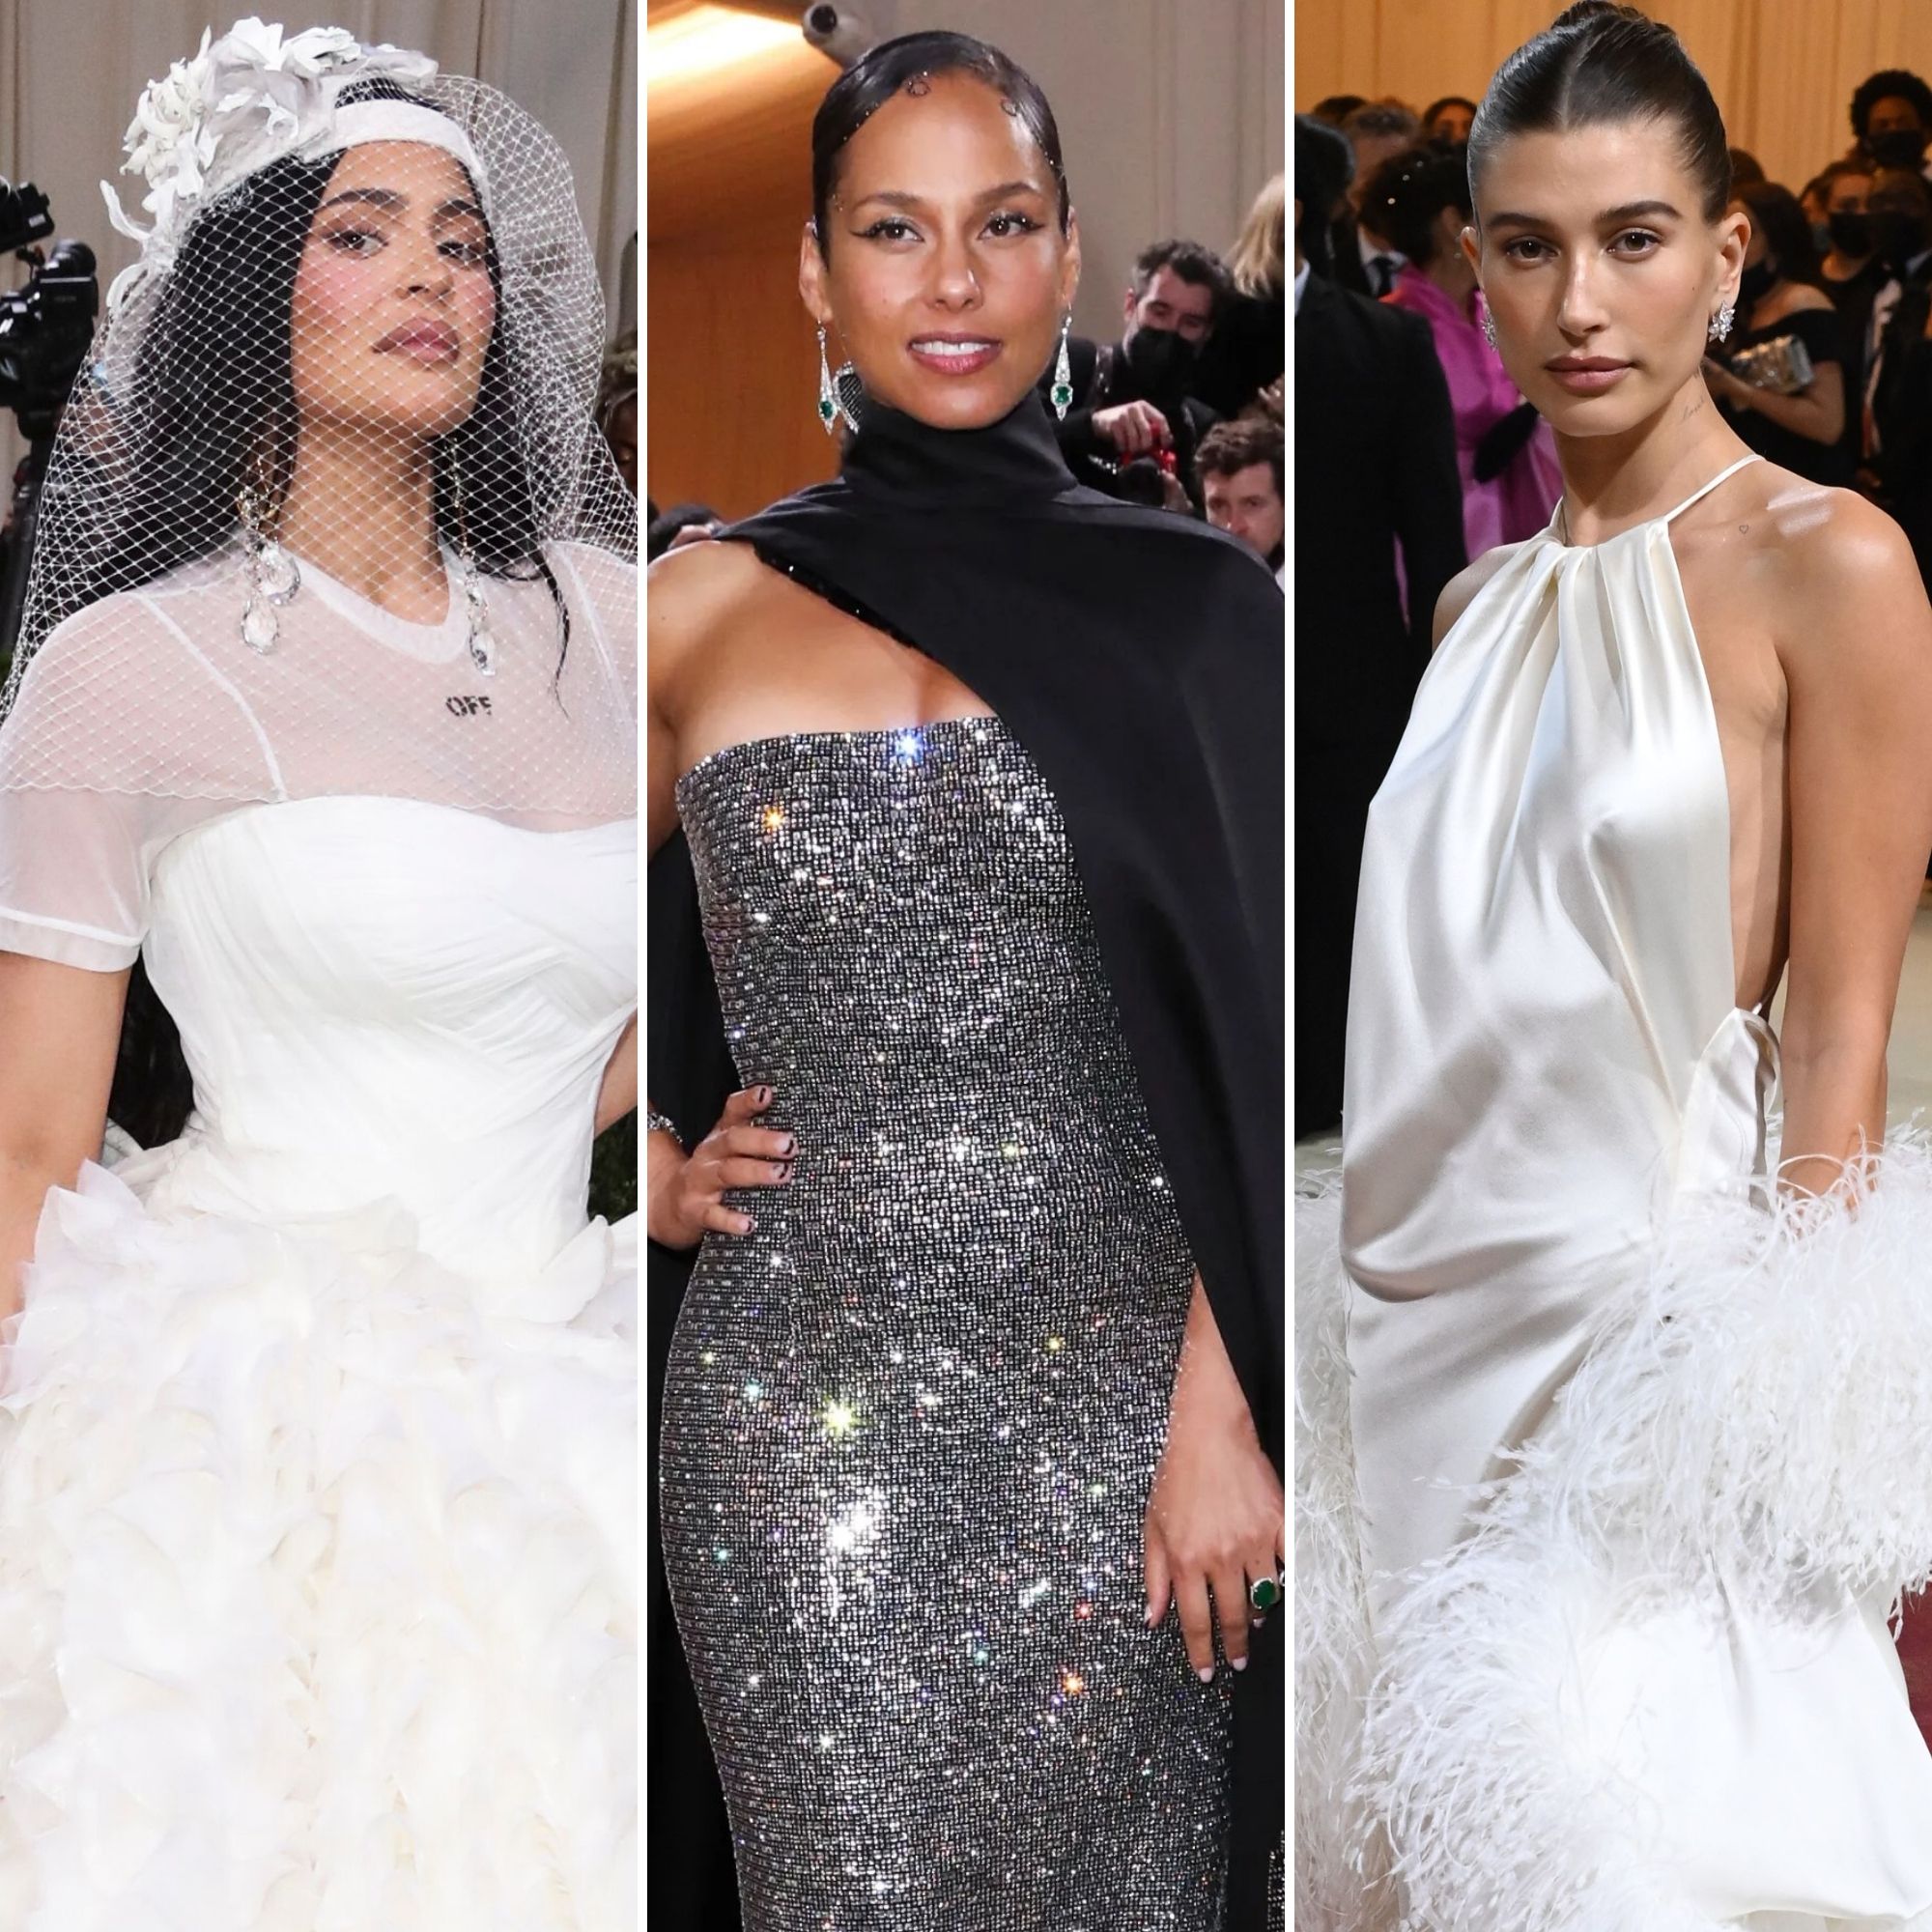 Met Gala 2021: All the Celebs Who Attended for the First Time